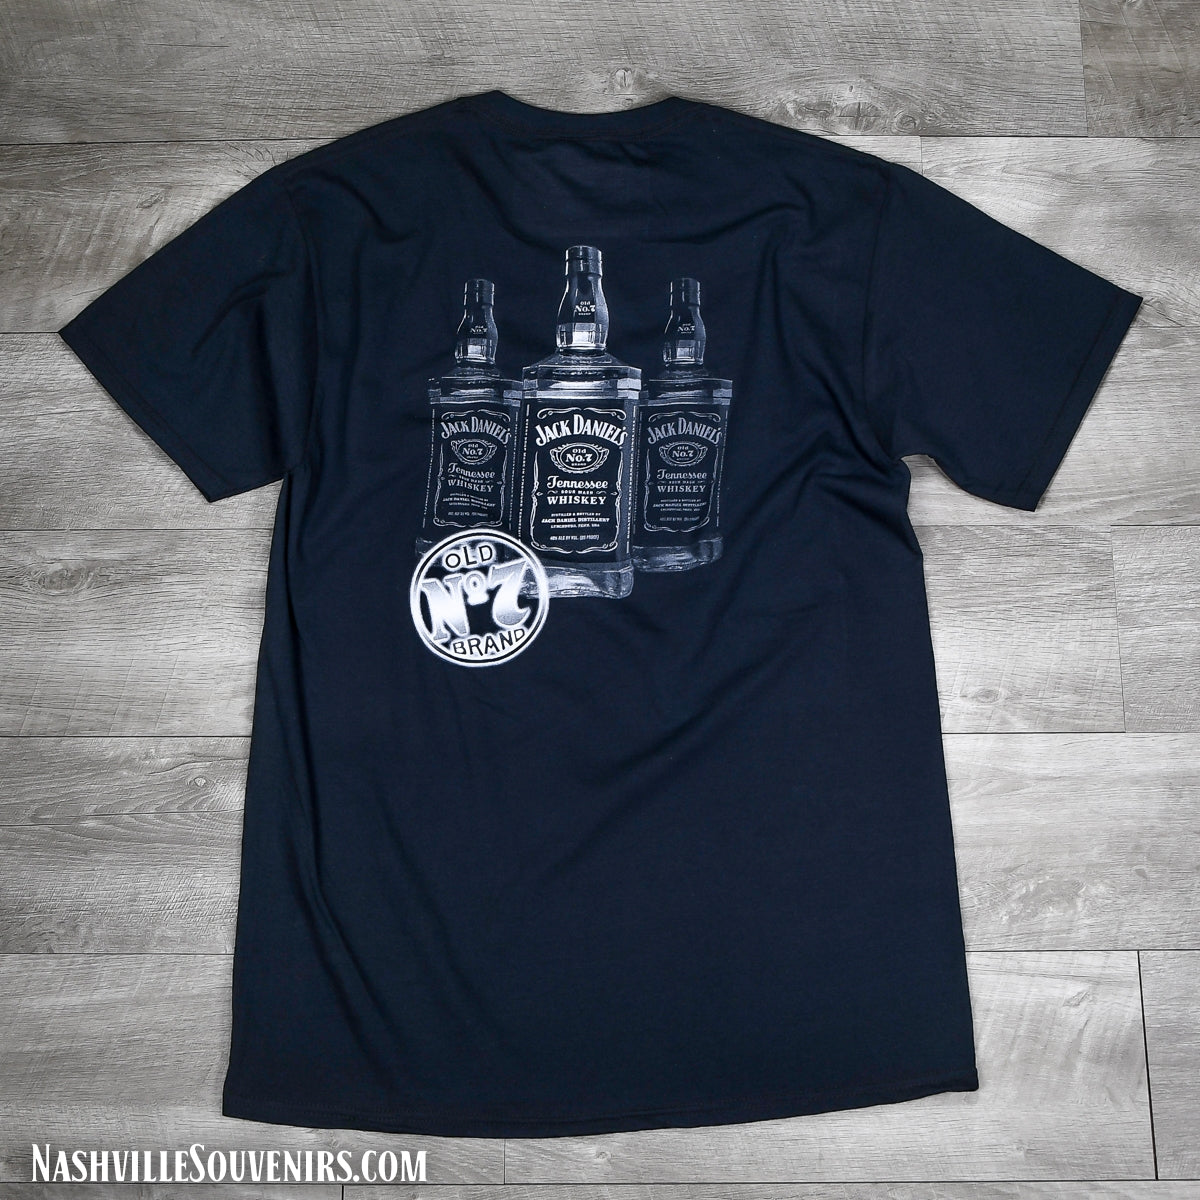 This officially licensed Jack Daniels Bottles T-shirt has a arched Jack Daniels name on the front with three whiskey bottles of Jack on the back. FREE SHIPPING on all US orders over $75!